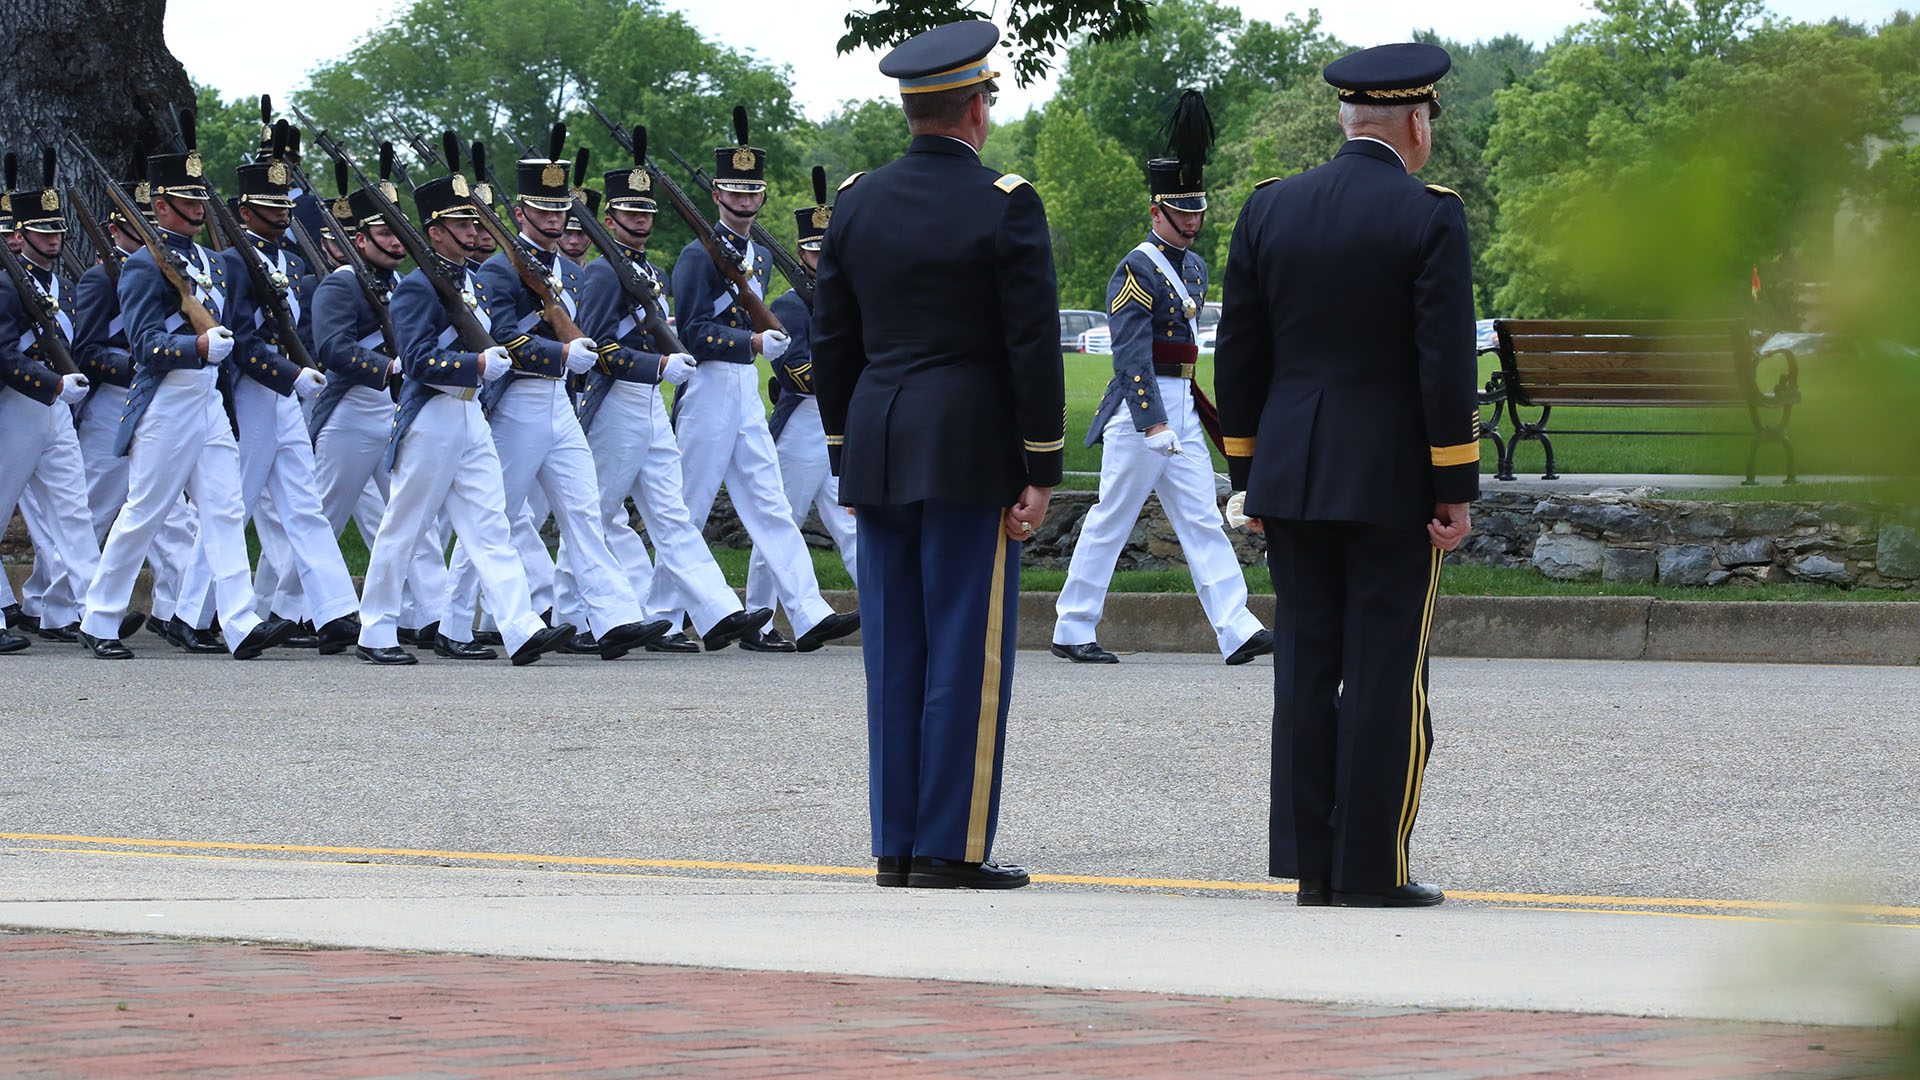 Gen. Peay and Col. Wanovich reviewing parade